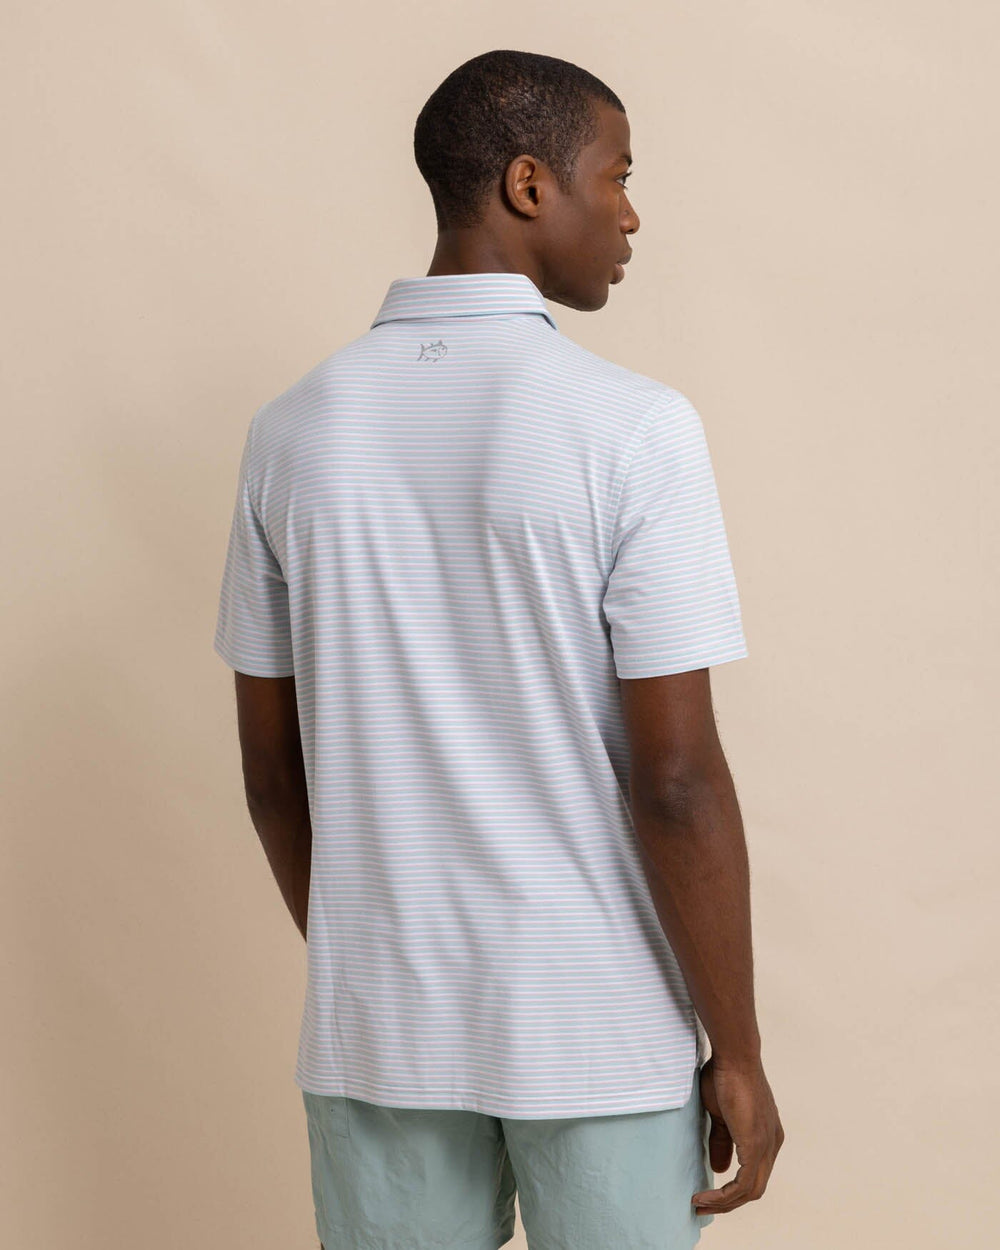 The back view of the Southern Tide Ryder Heather Halls Performance Polo by Southern Tide - Heather Wake Blue